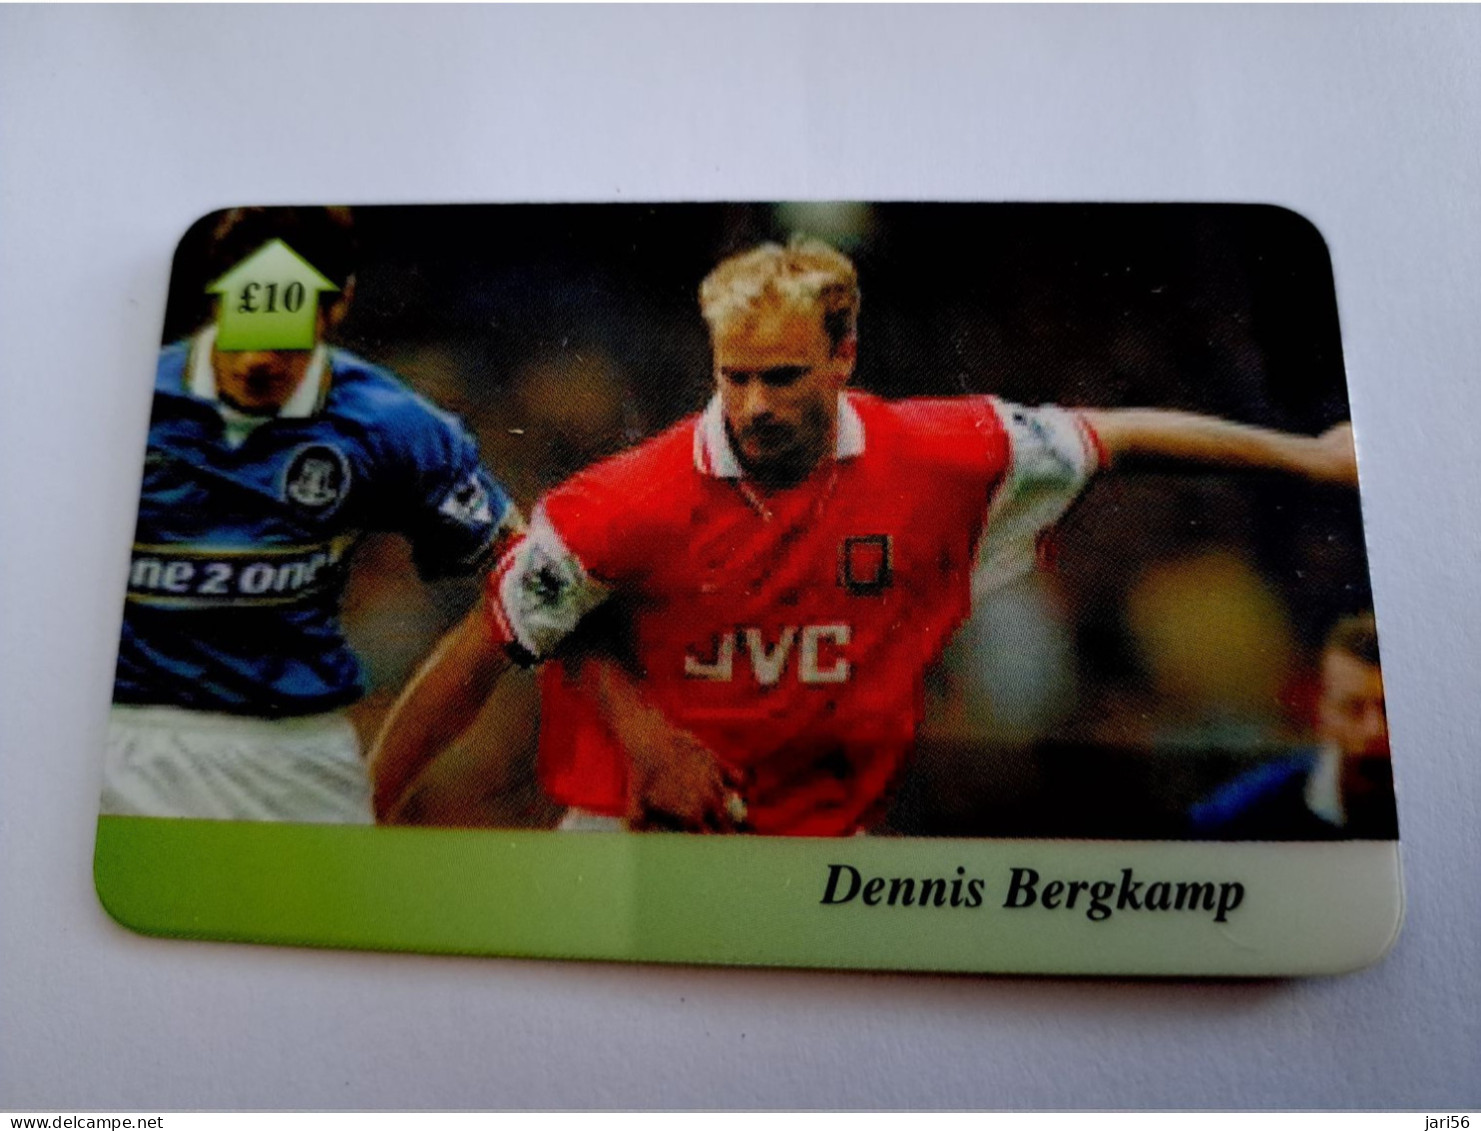 GREAT BRITAIN / 10 POUND  / DENNIS BERGKAMP     / FOOTBAL/SOCCER /     /    PREPAID CARD/ MINT   **15725** - [10] Collections